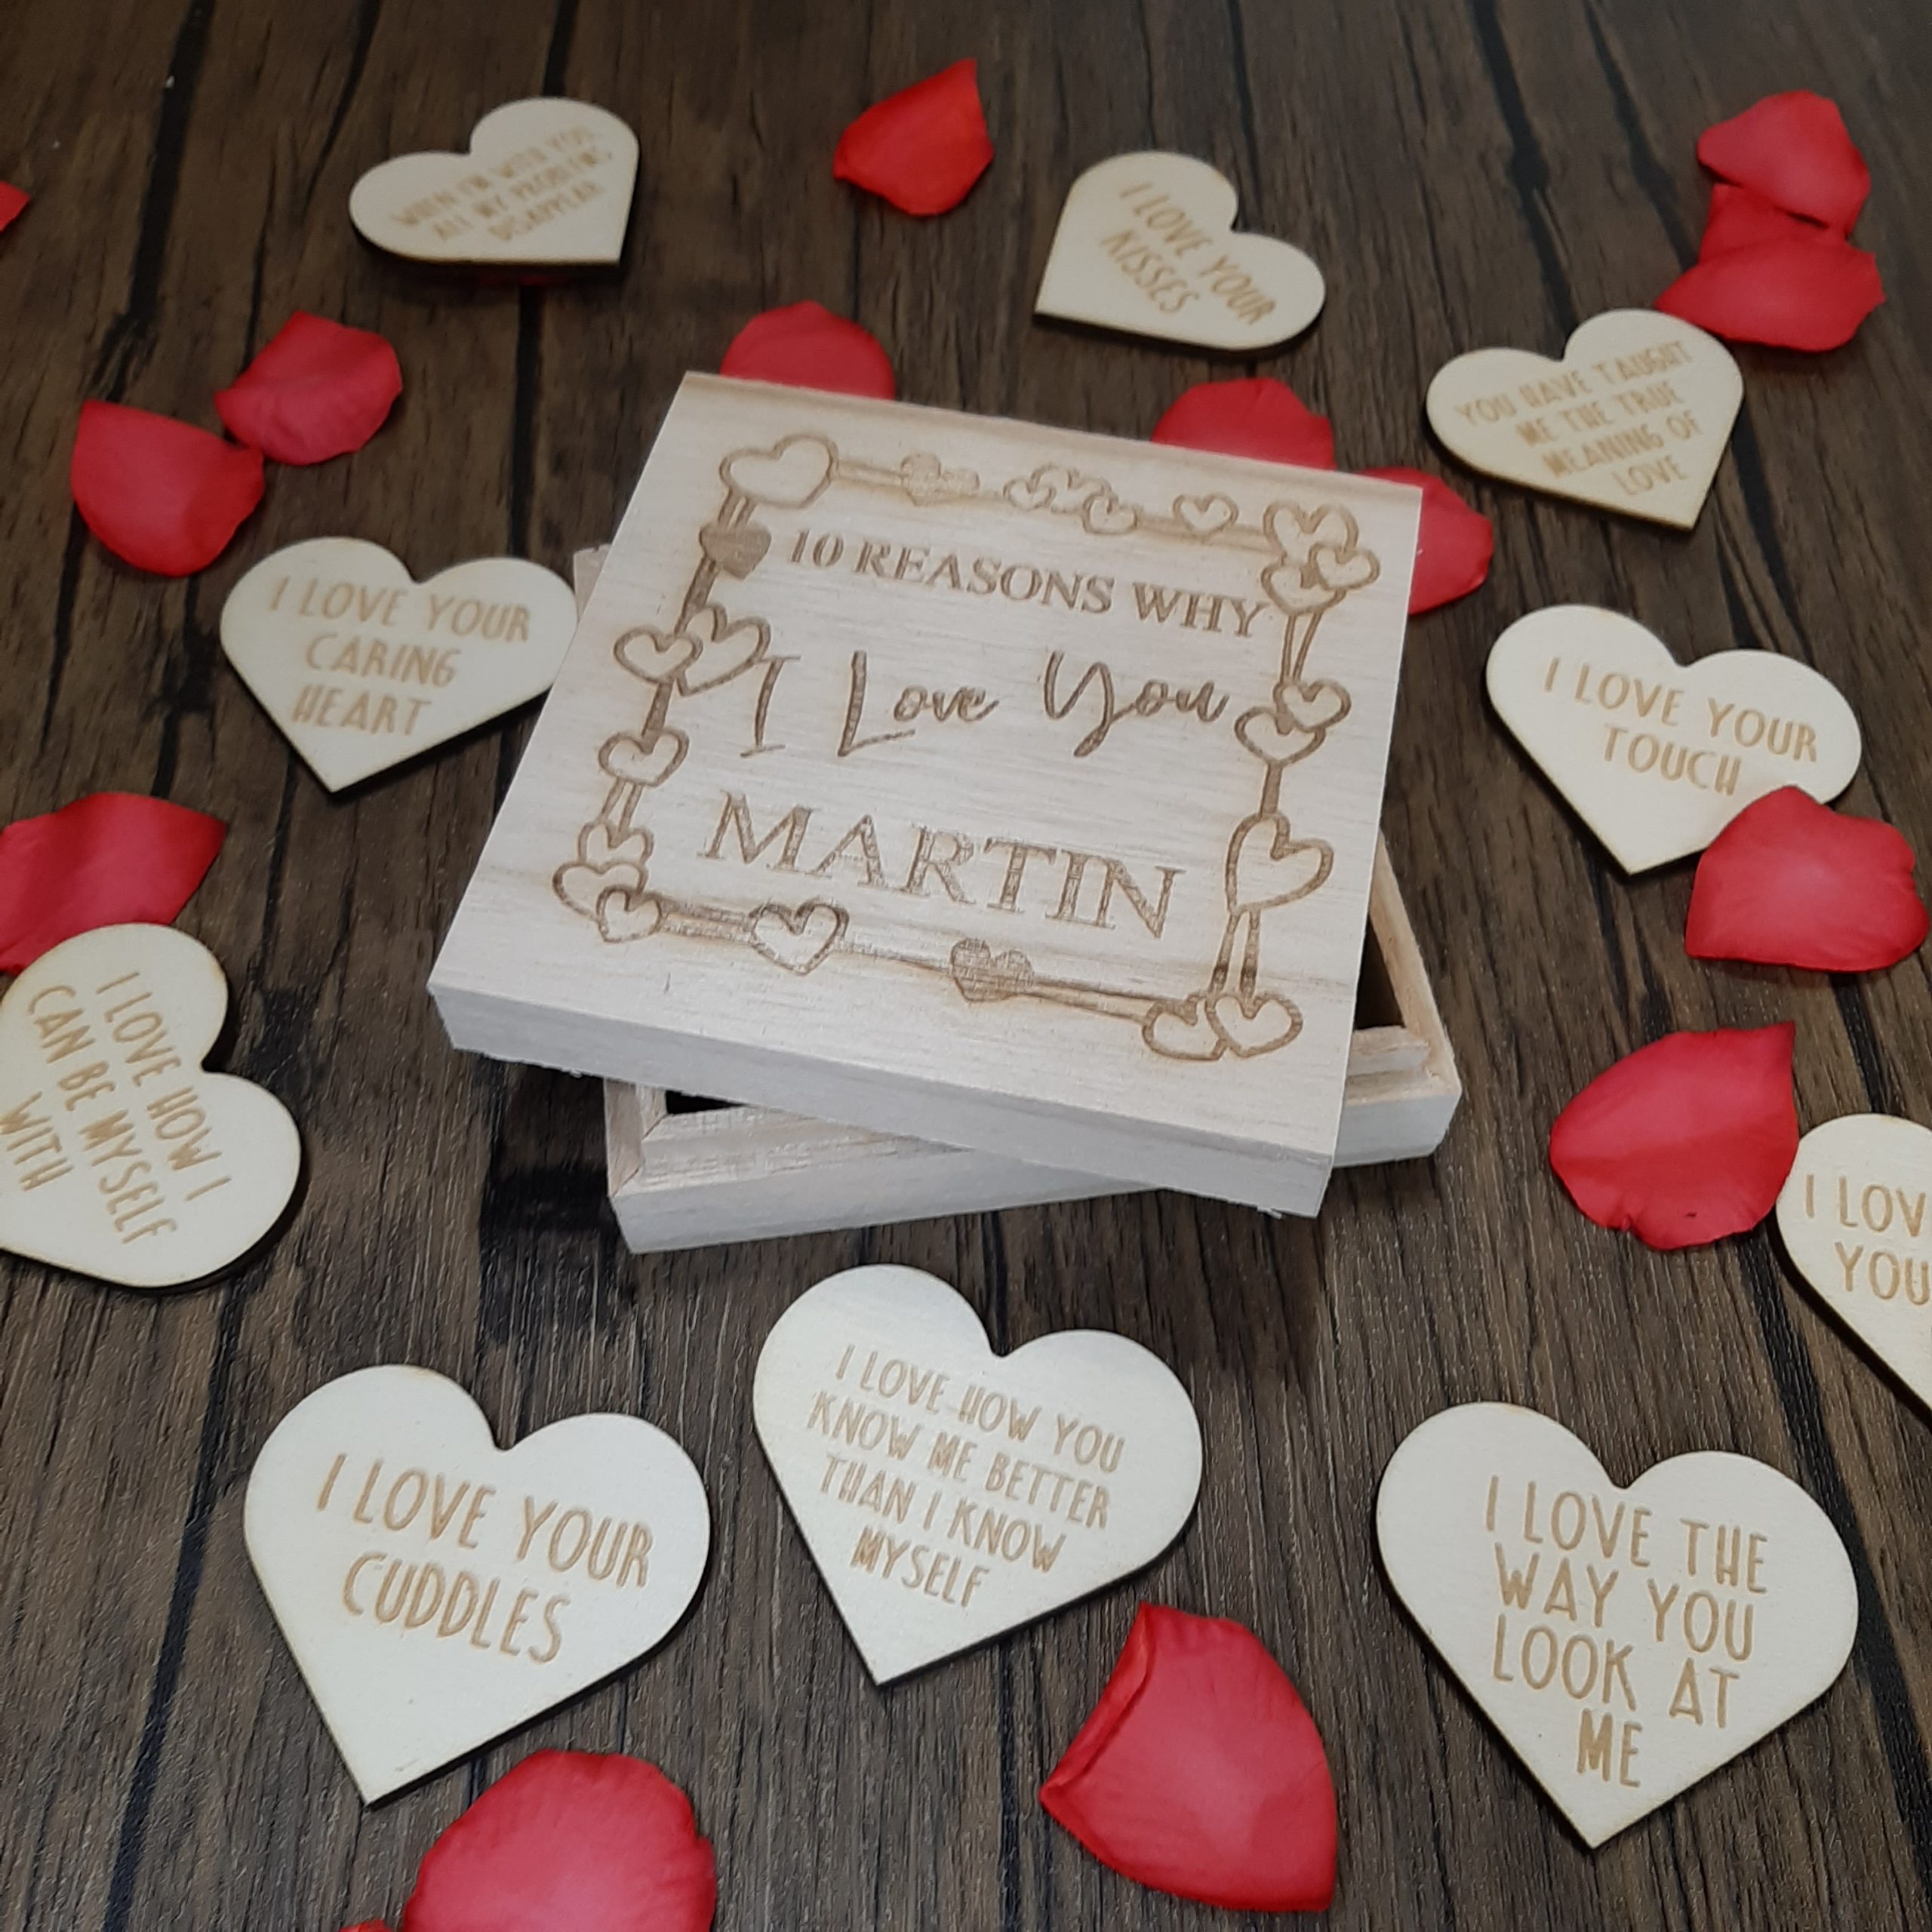 10 Reasons Why I Love You Token Box zoomed in to show wooden heart tokens with personalised messages with rose petals displayed for valentines day